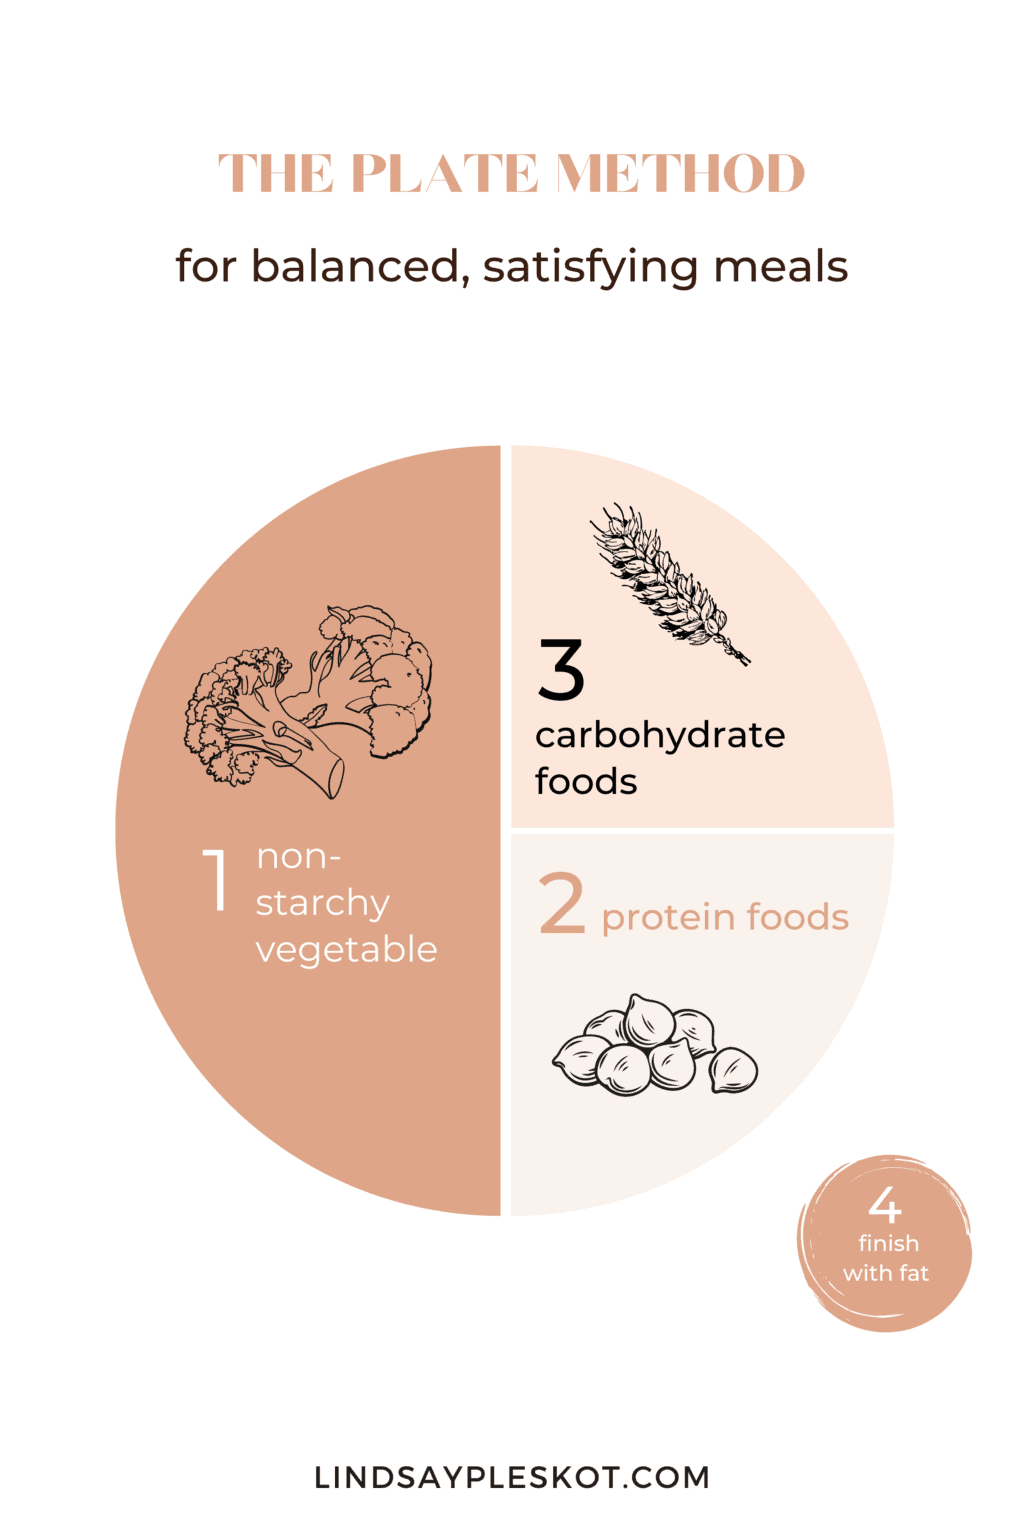 An infographic of the plate method which demonstrates that a balanced meal contains 1/2 plate of veggies, 1/4 plate of protein, 1/4 plate of carbs plus healthy fats.